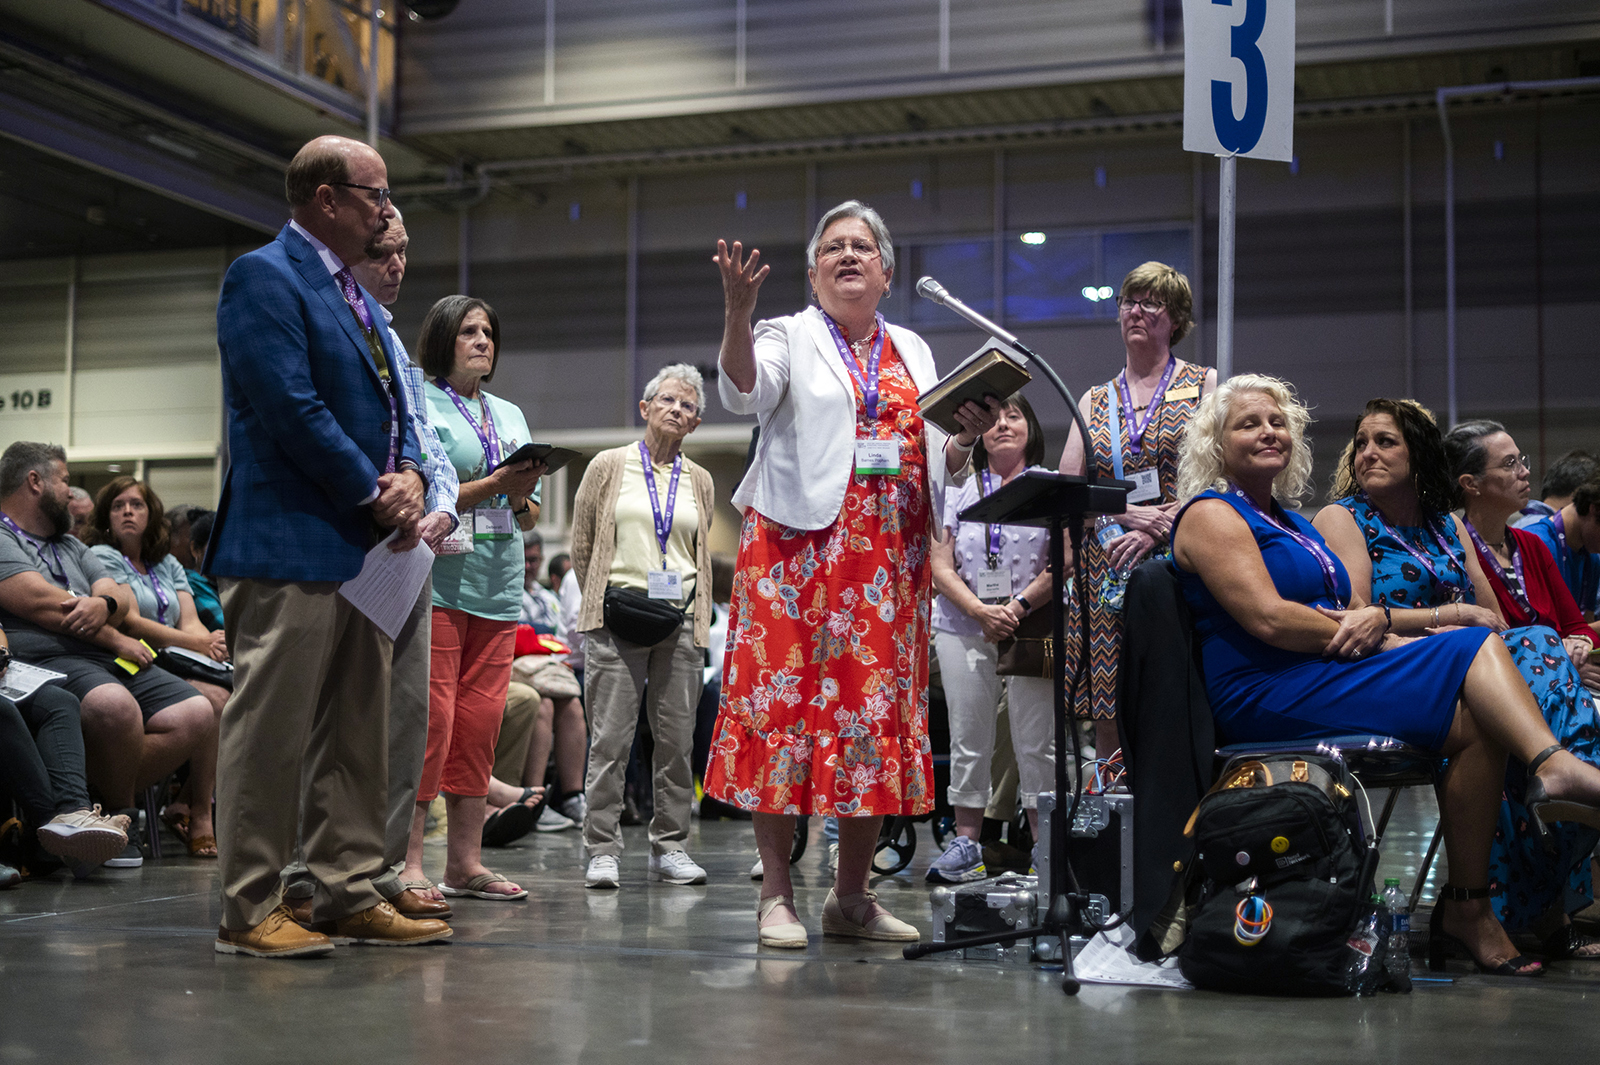 The Rev. Linda Barnes Popham speaks at the Southern Baptist Convention annual meeting at the Ernest N. Memorial Convention Center in New Orleans, La., on June 13, 2023. RNS photo by Emily Kask